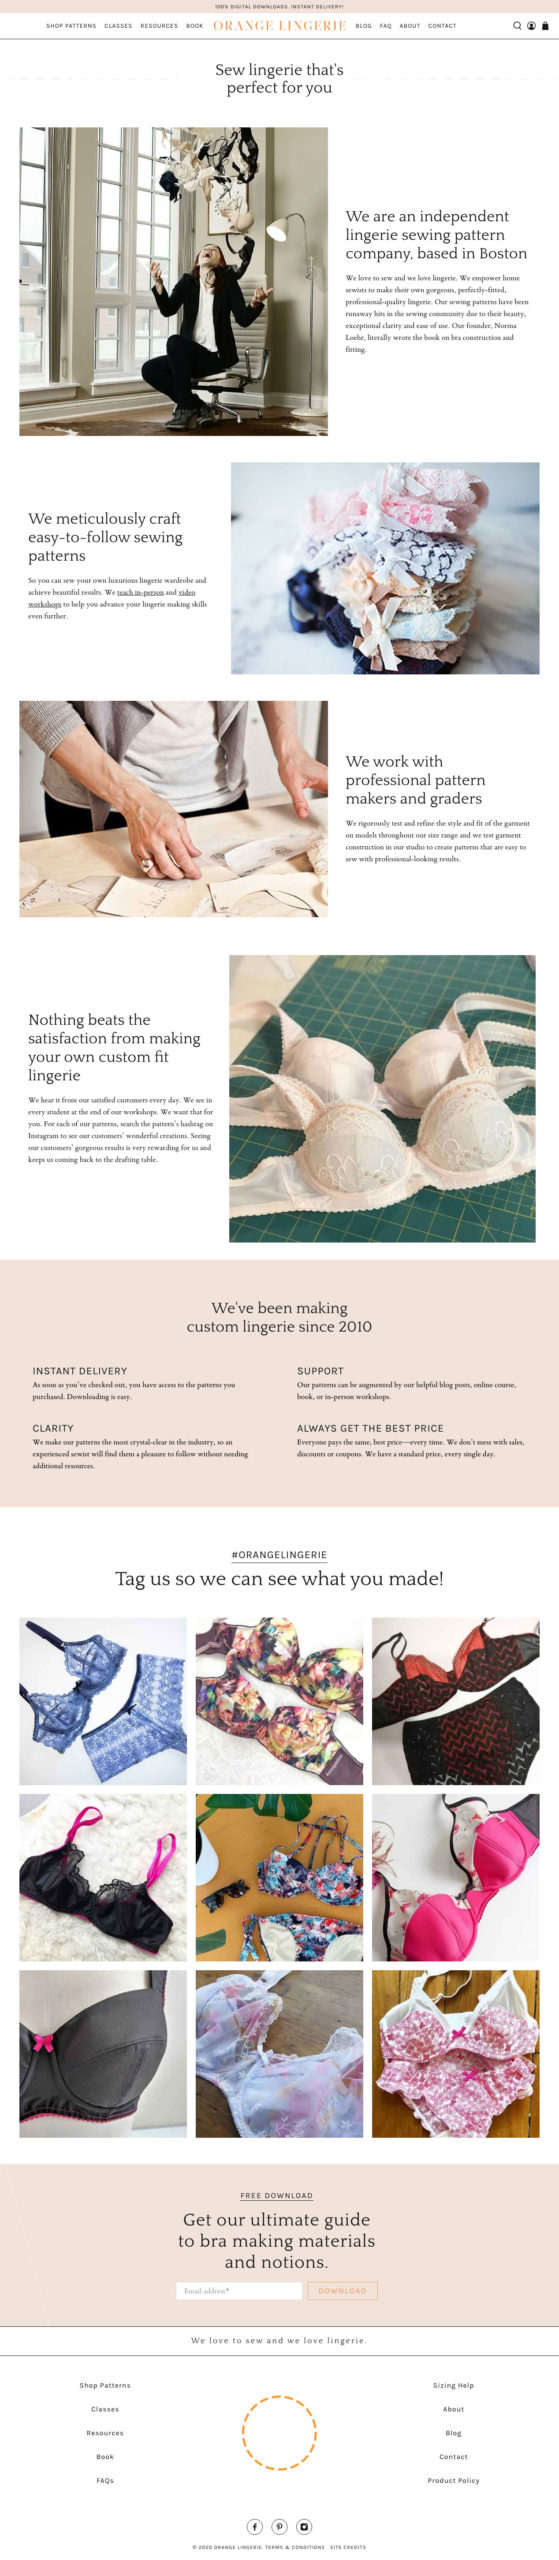 orange lingerie's new about page on shopify